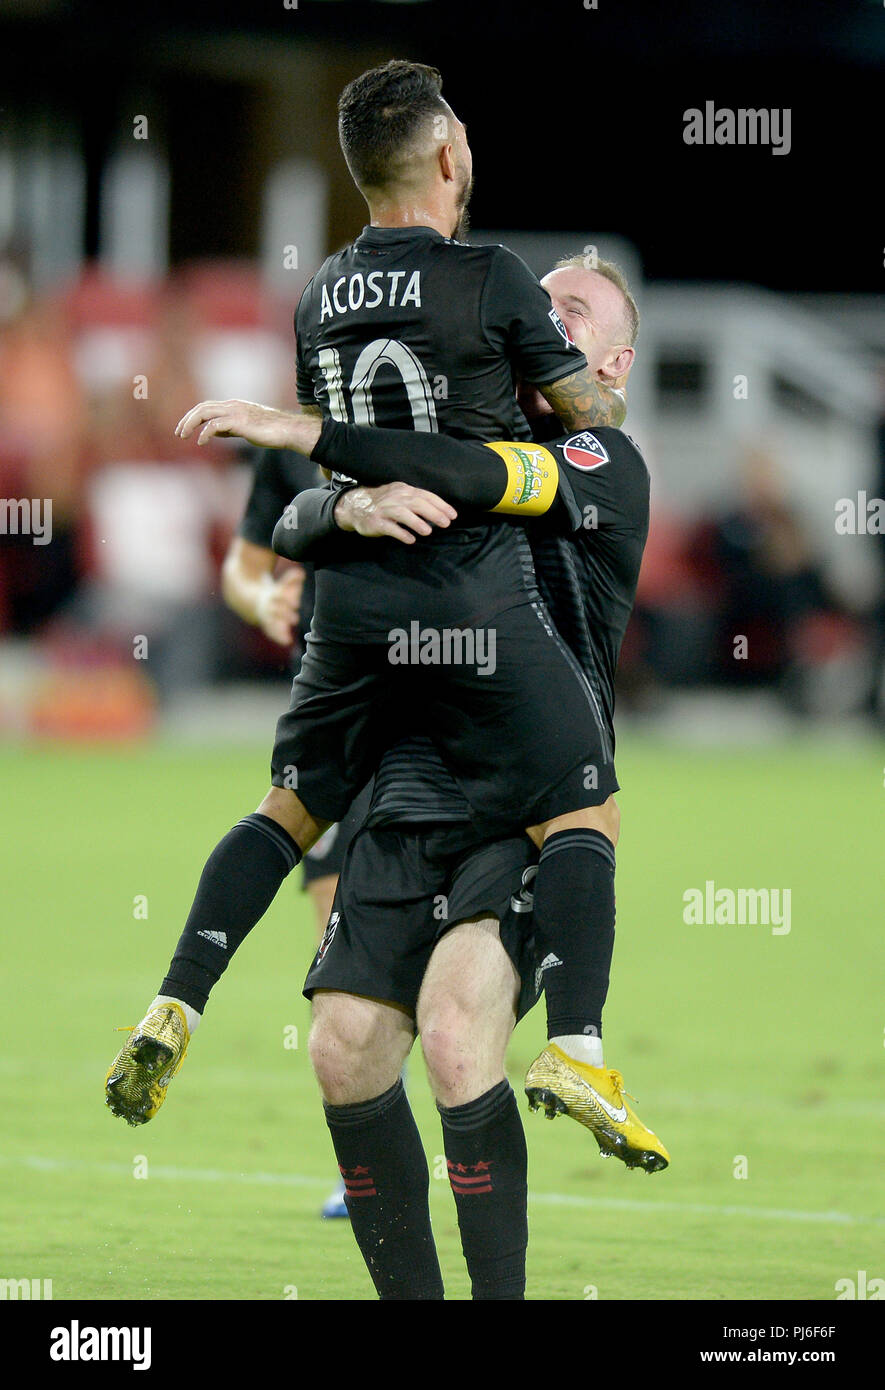 September 2, 2018 - Washington, DC, USA - 20180902 - D.C. United midfielder LUCIANO ACOSTA (10) celebrates with D.C. United forward WAYNE ROONEY (9), following his goal against Atlanta United FC in the first half at Audi Field in Washington. (Credit Image: © Chuck Myers/ZUMA Wire) Stock Photo